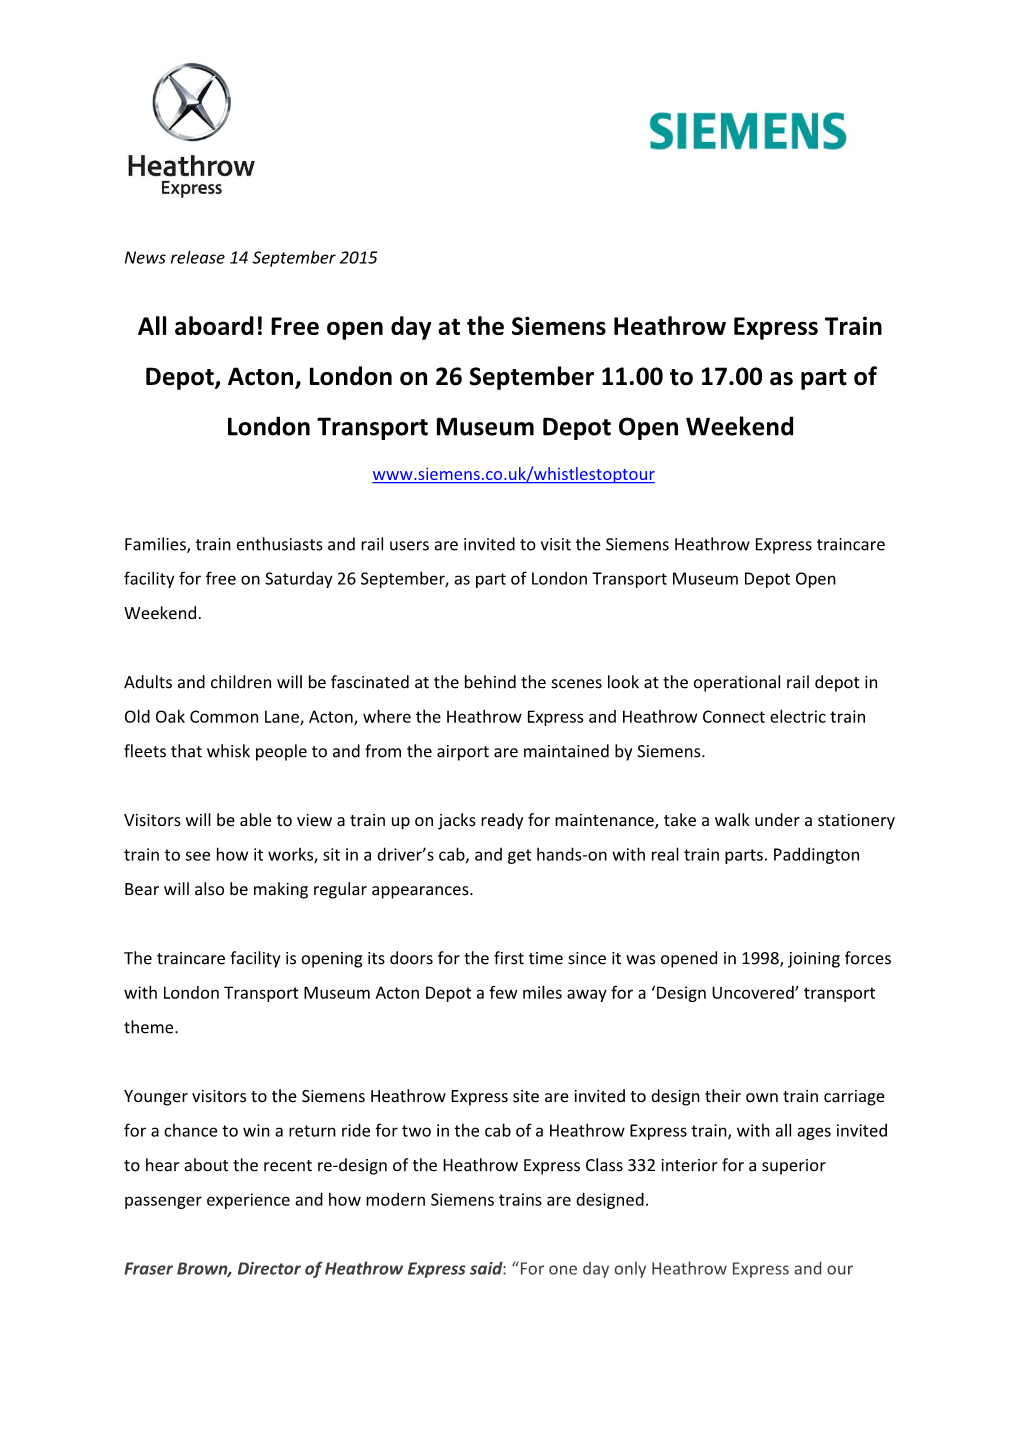 Free Open Day at the Siemens Heathrow Express Train Depot, Acton, London on 26 September 11.00 to 17.00 As Part of London Transport Museum Depot Open Weekend